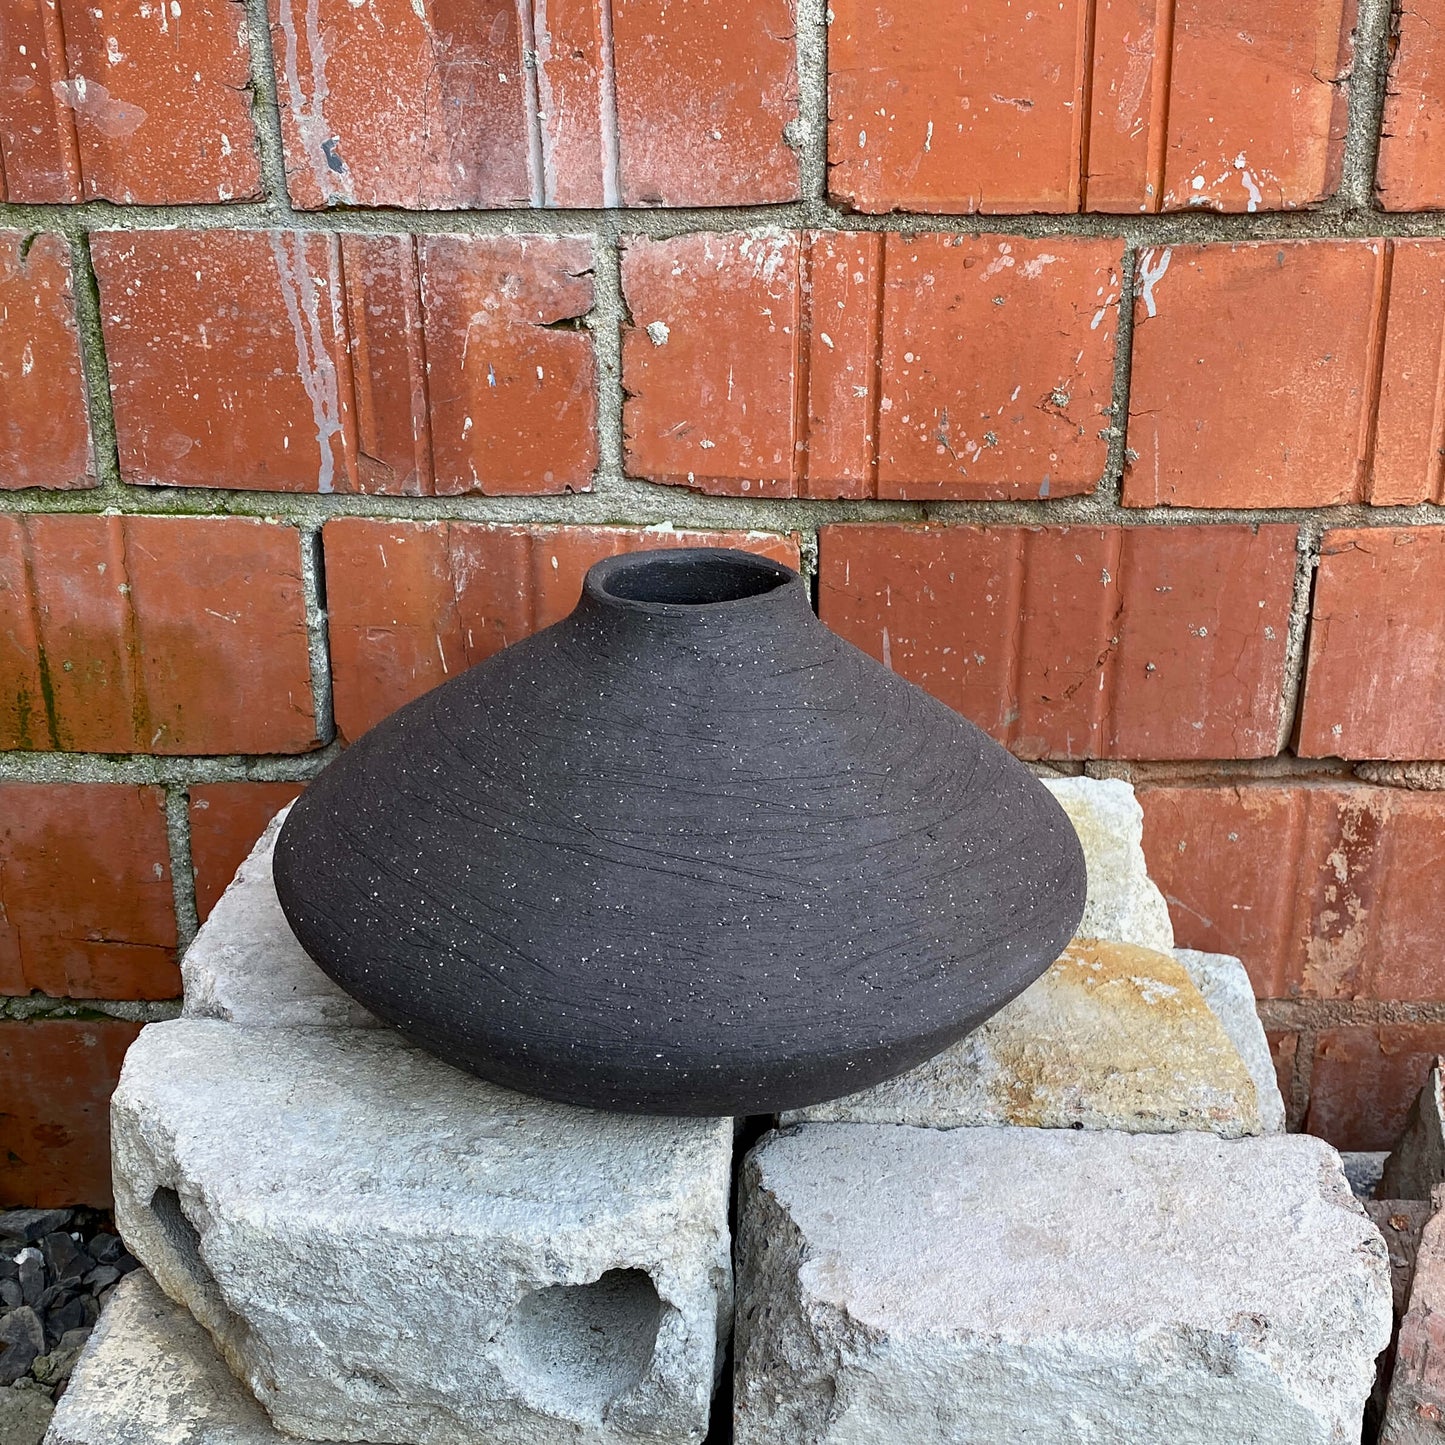 Black, wide belly ceramic decor vessel with stone texture.